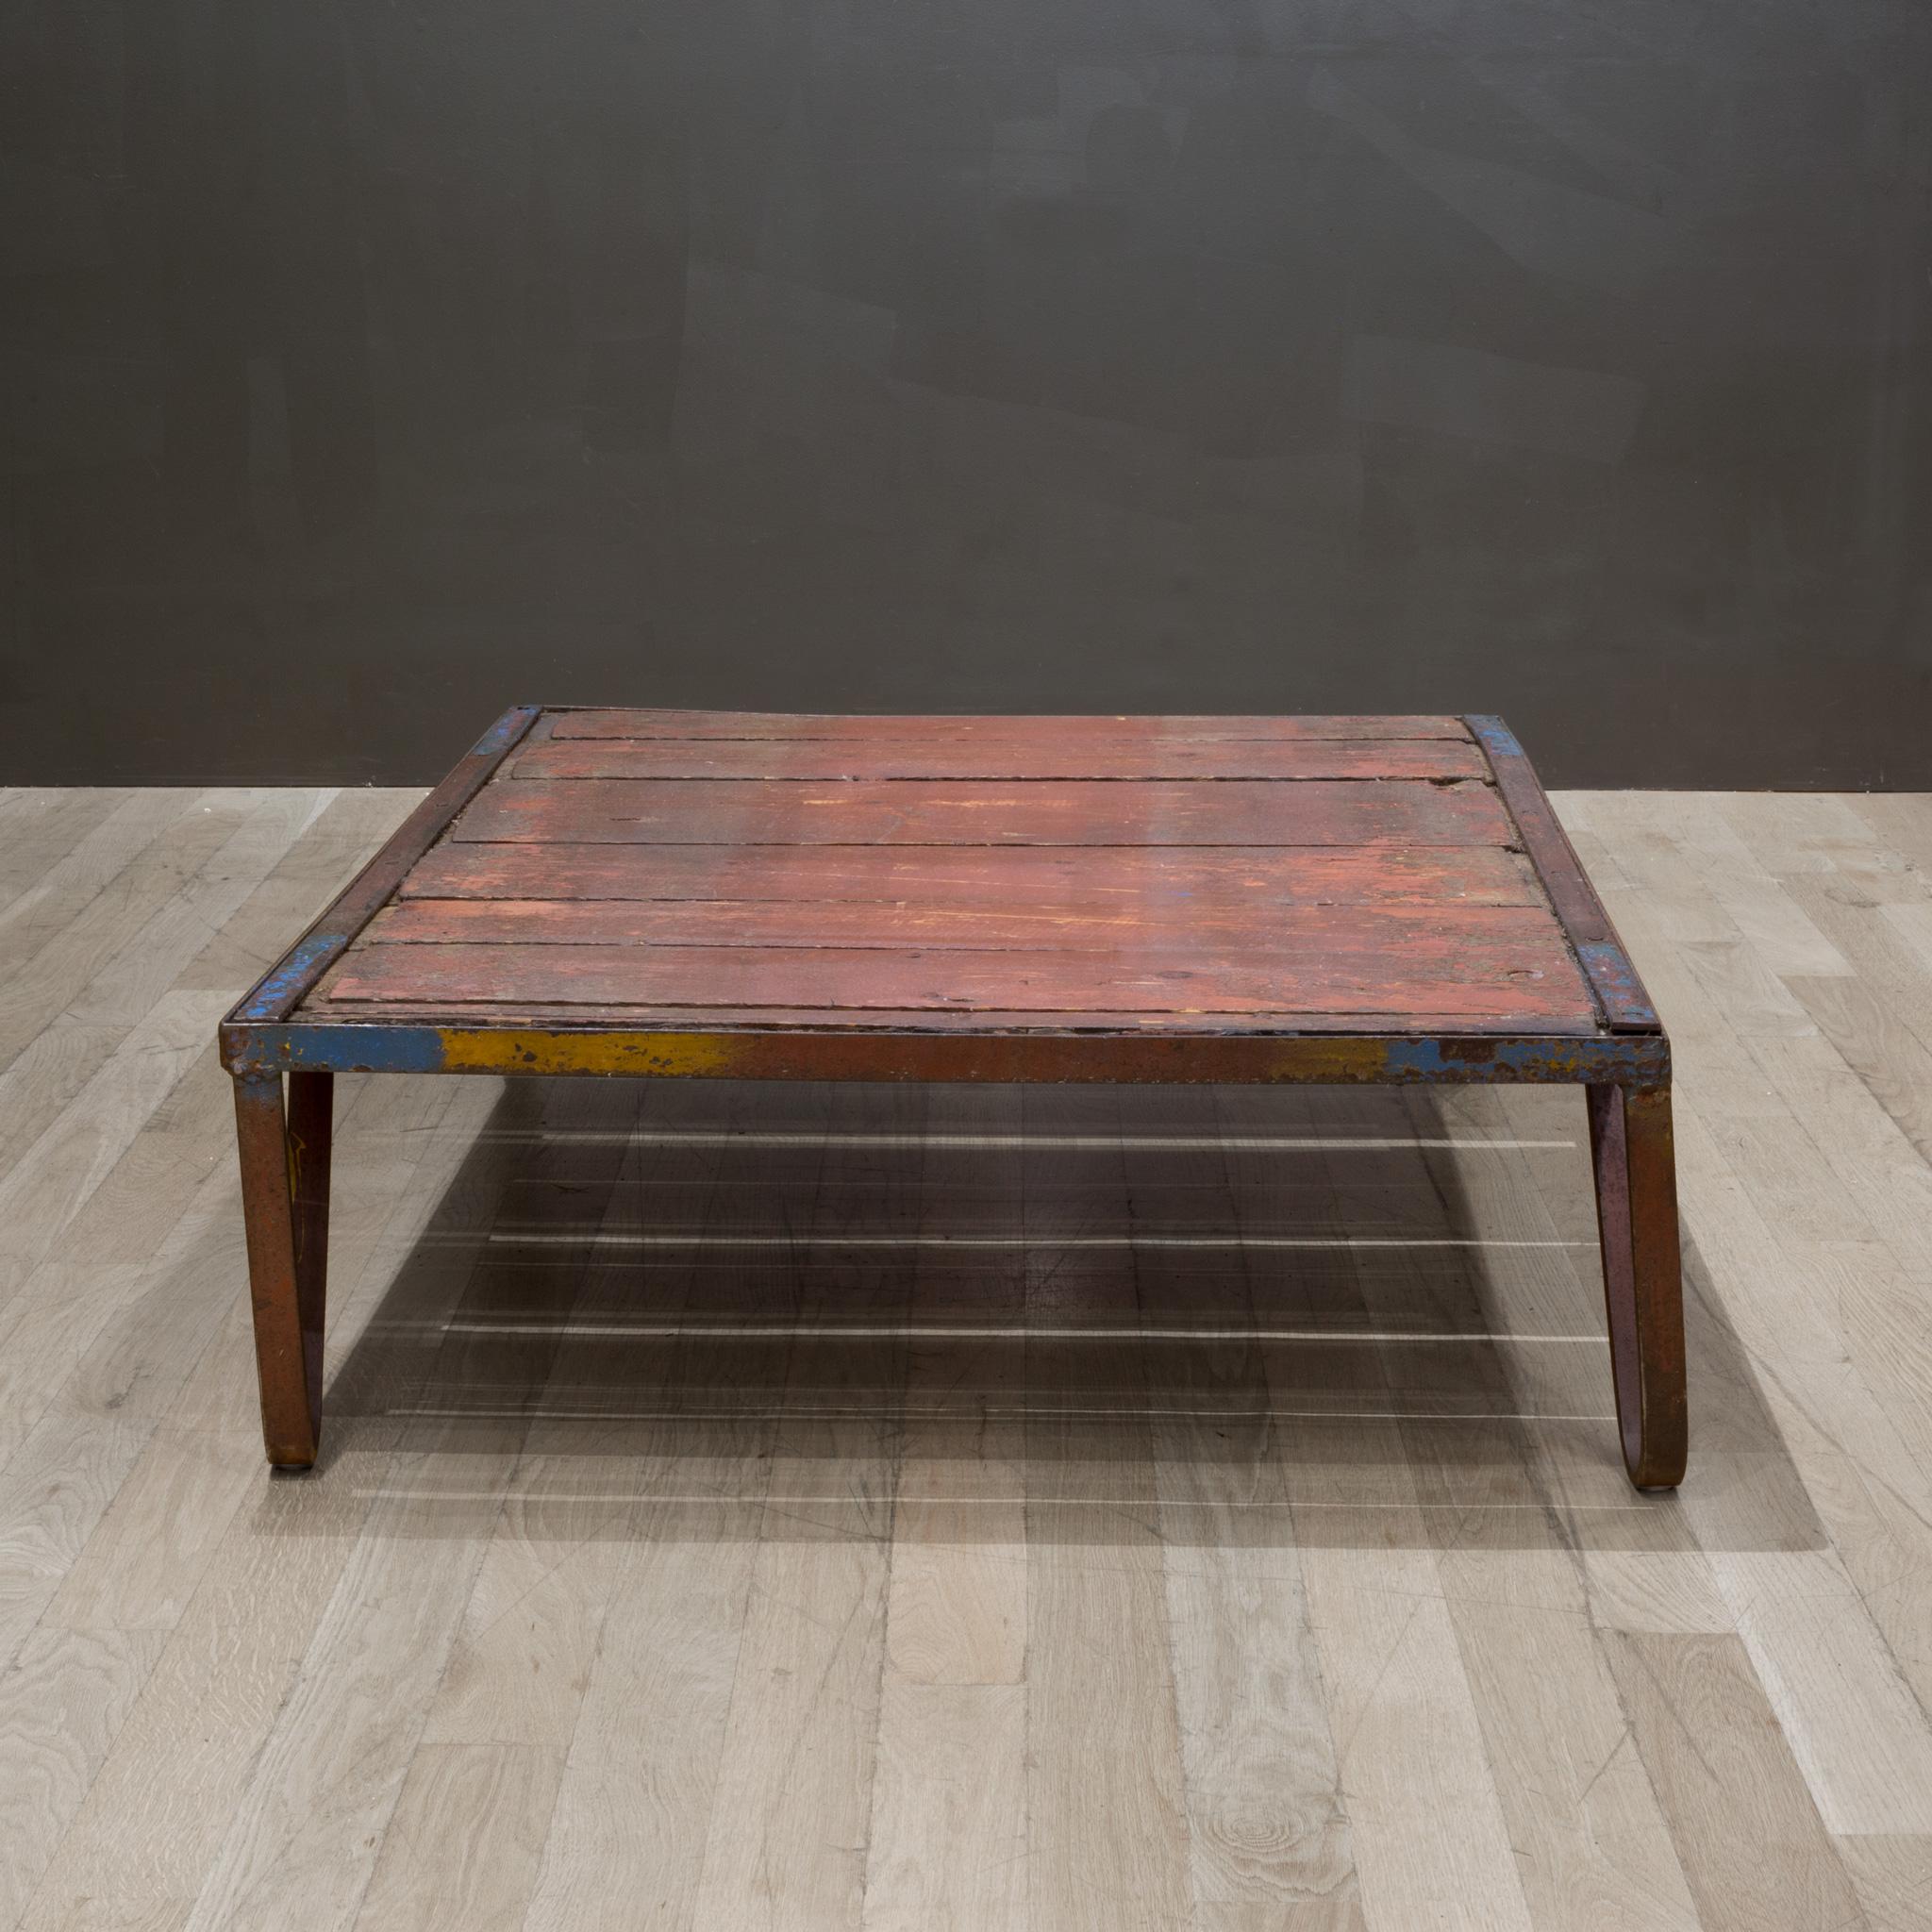 Steel Early 20th c. Dutch Pallet Coffee Table, c.1940 For Sale